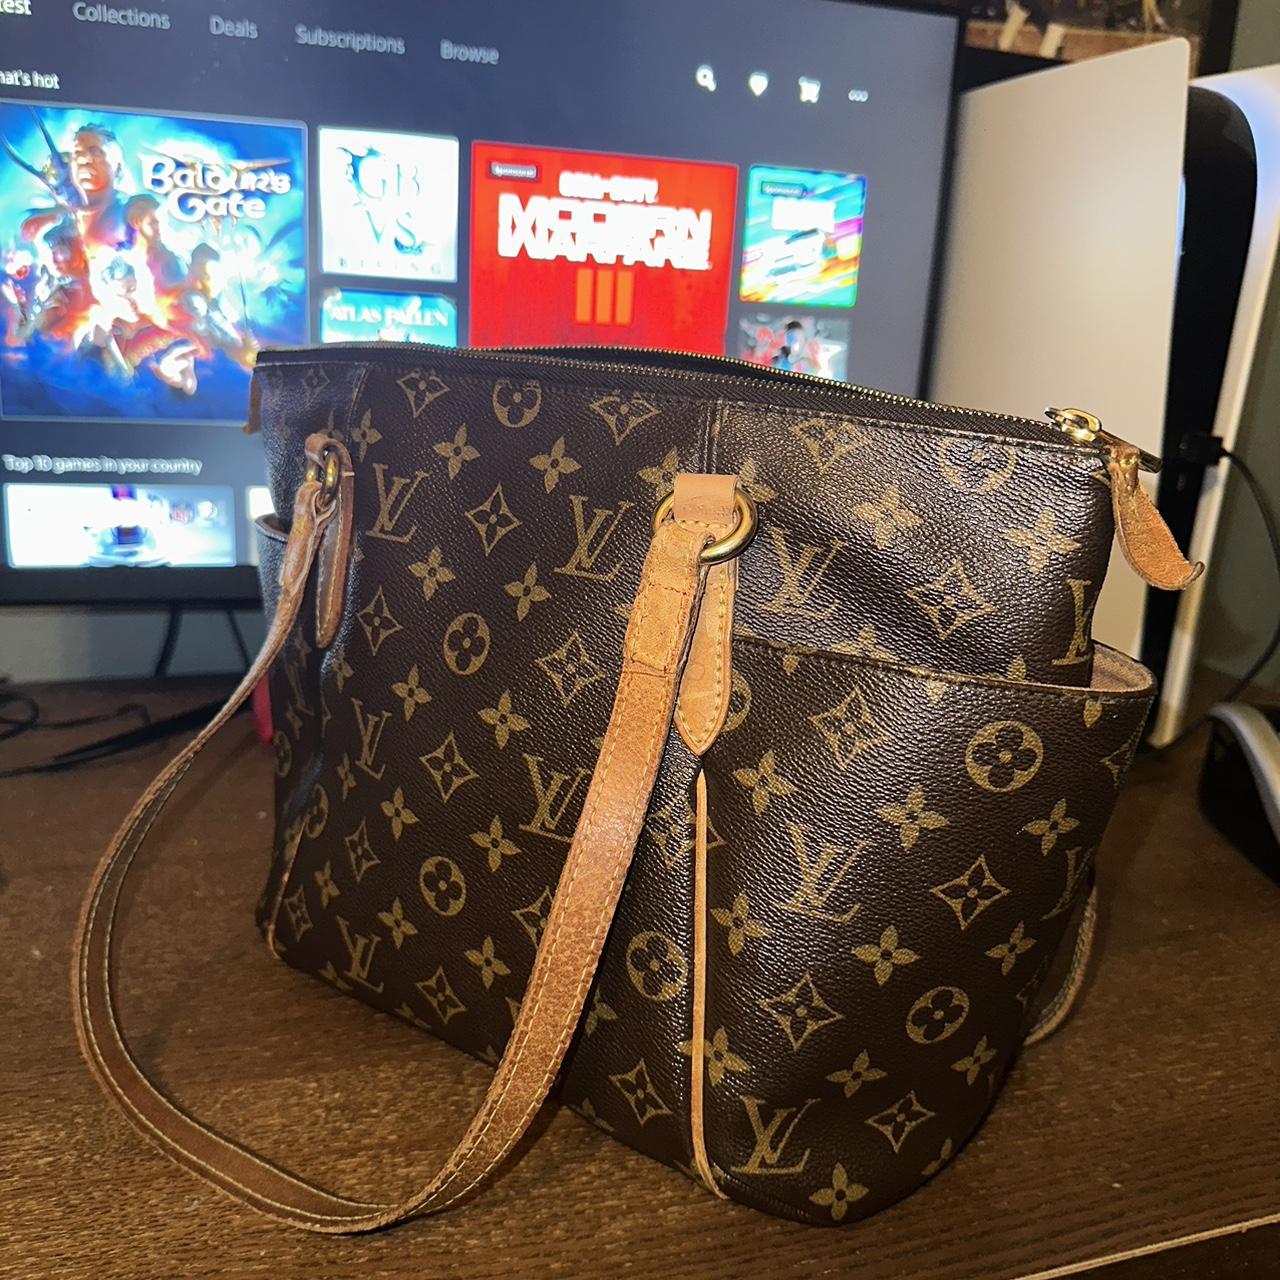 Selling this one of a kind vintage Louis Vuitton - Depop